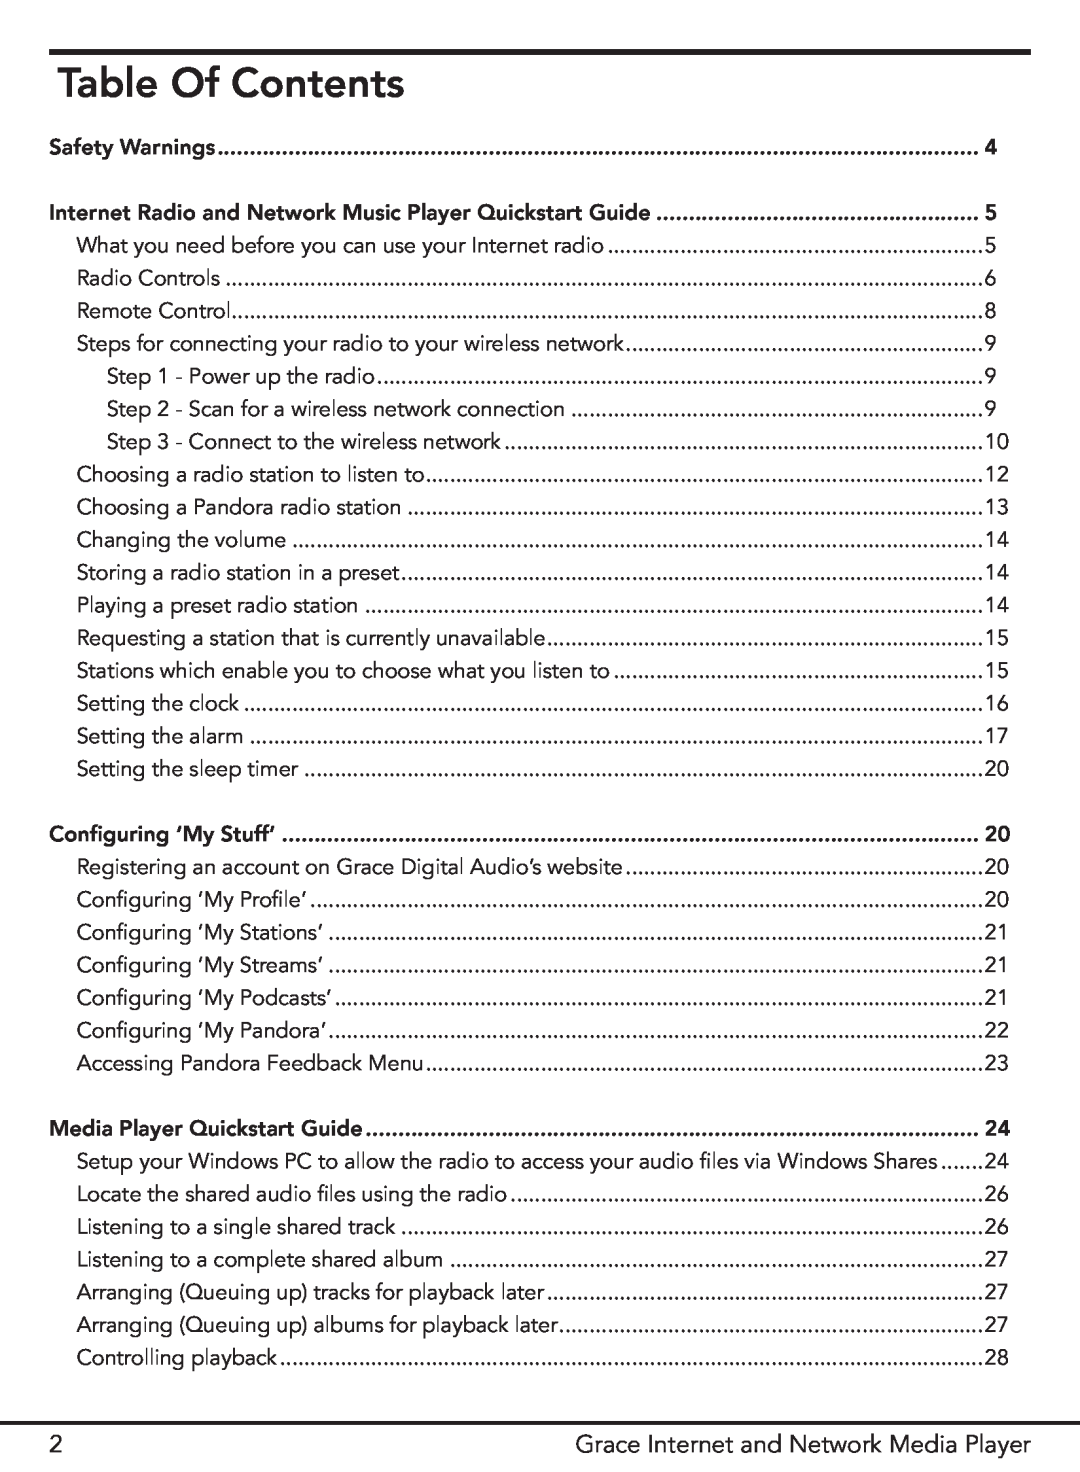 Grace GDI-IR3000 manual Table Of Contents, Grace Internet and Network Media Player 